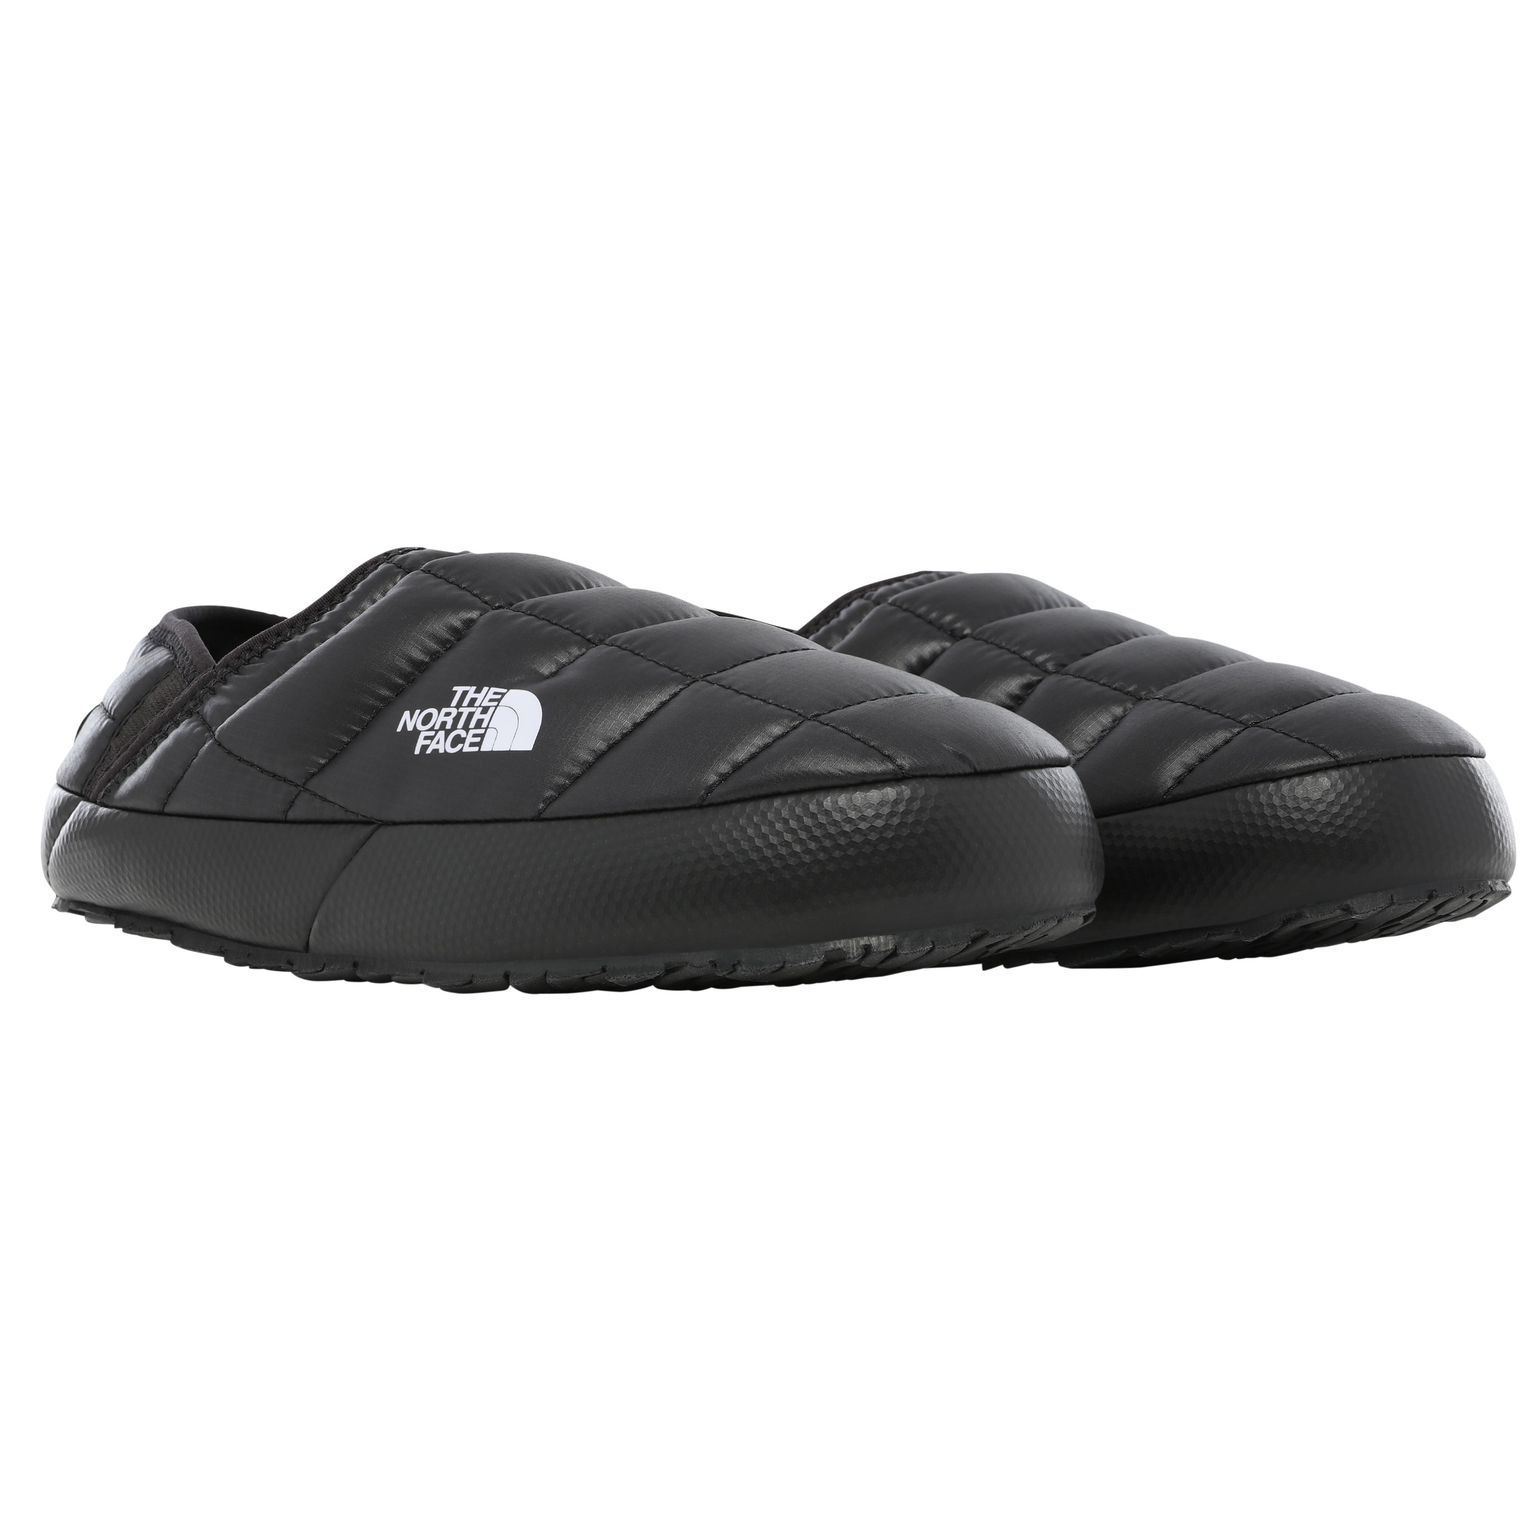 The North Face Women's Thermoball Traction Mule V Tnf Black/Tnf Black